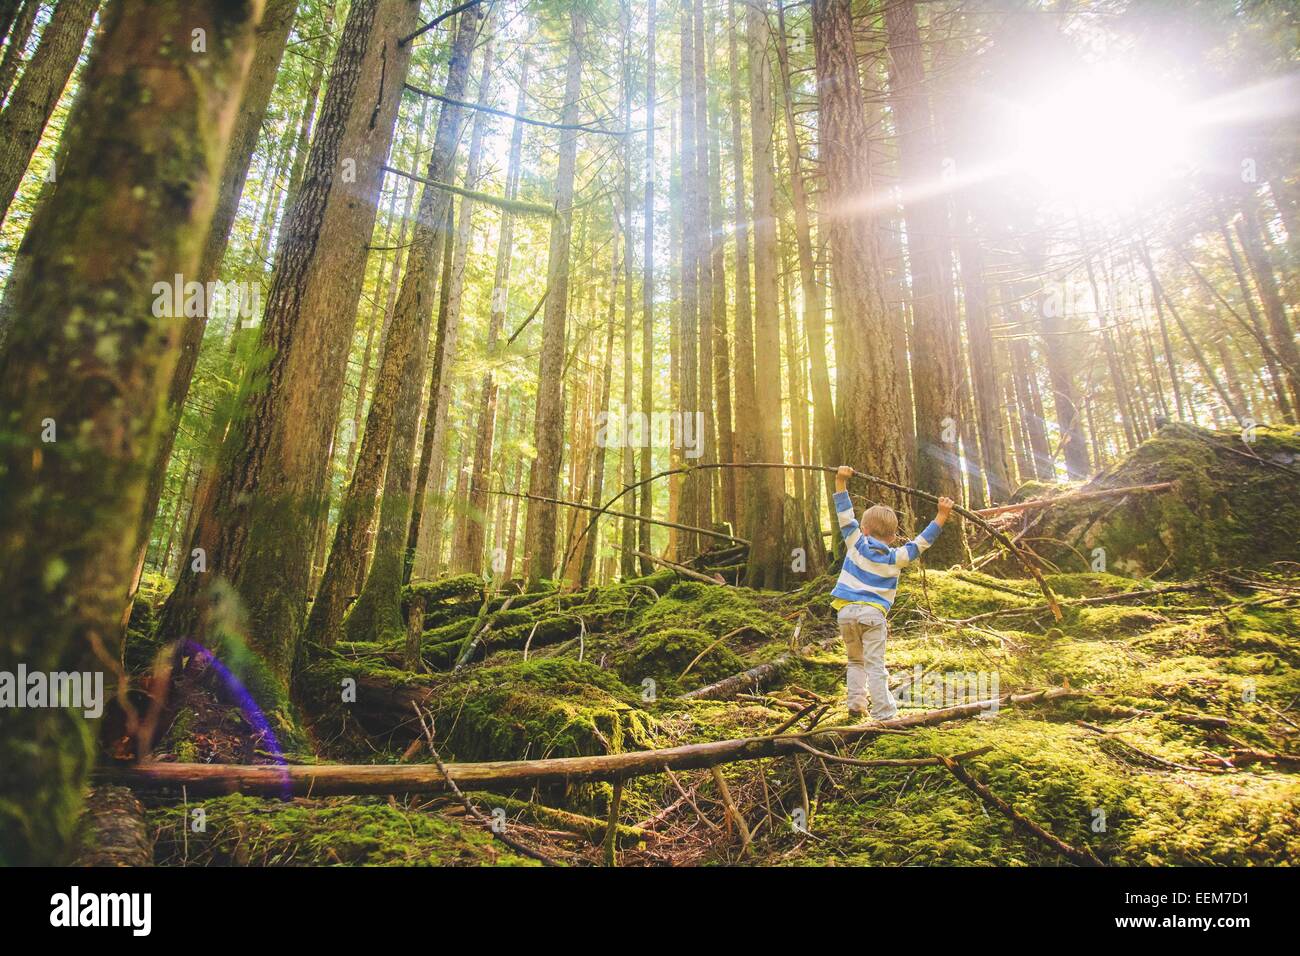 Boy balancing on a fallen tree in the forest, USA Stock Photo